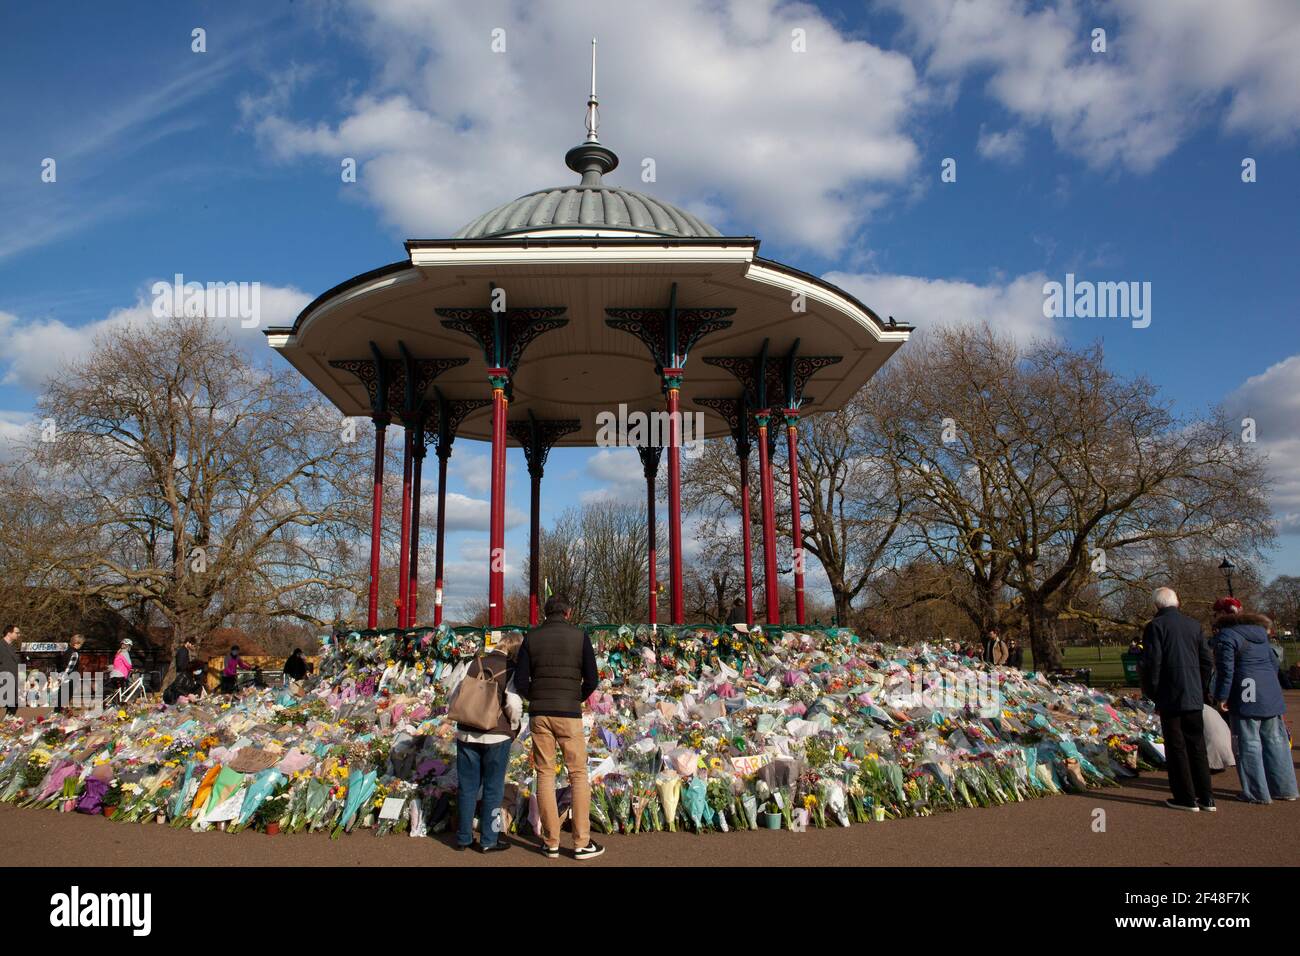 London, UK, 19 March 2021: Clapham Common bandstand and the surrounding trees and benches are home to an ever-growing shrine of flowers, candles and messages in memory of Sarah Everard. Some are personal and sad, others are angry and speak of the high numbers of women killed each year by men. Last week the Metropolitan Police broke up a vigil at the site. Anna Watson/Alamy Live News Stock Photo